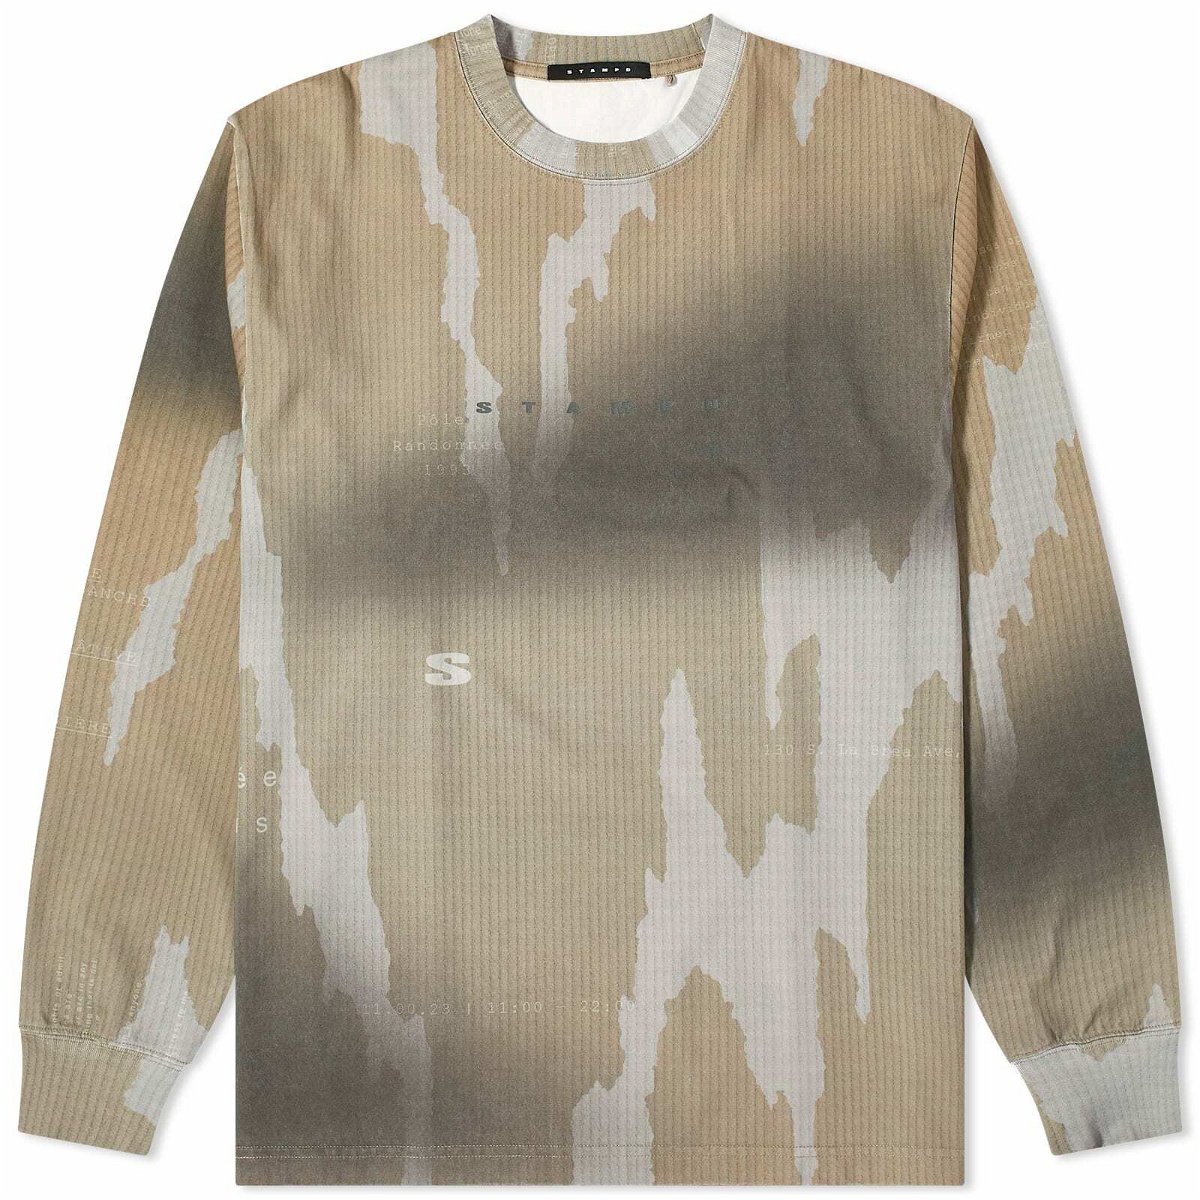 Photo: Stampd Men's Long Sleeve Sublimated T-Shirt in Ikat Camo